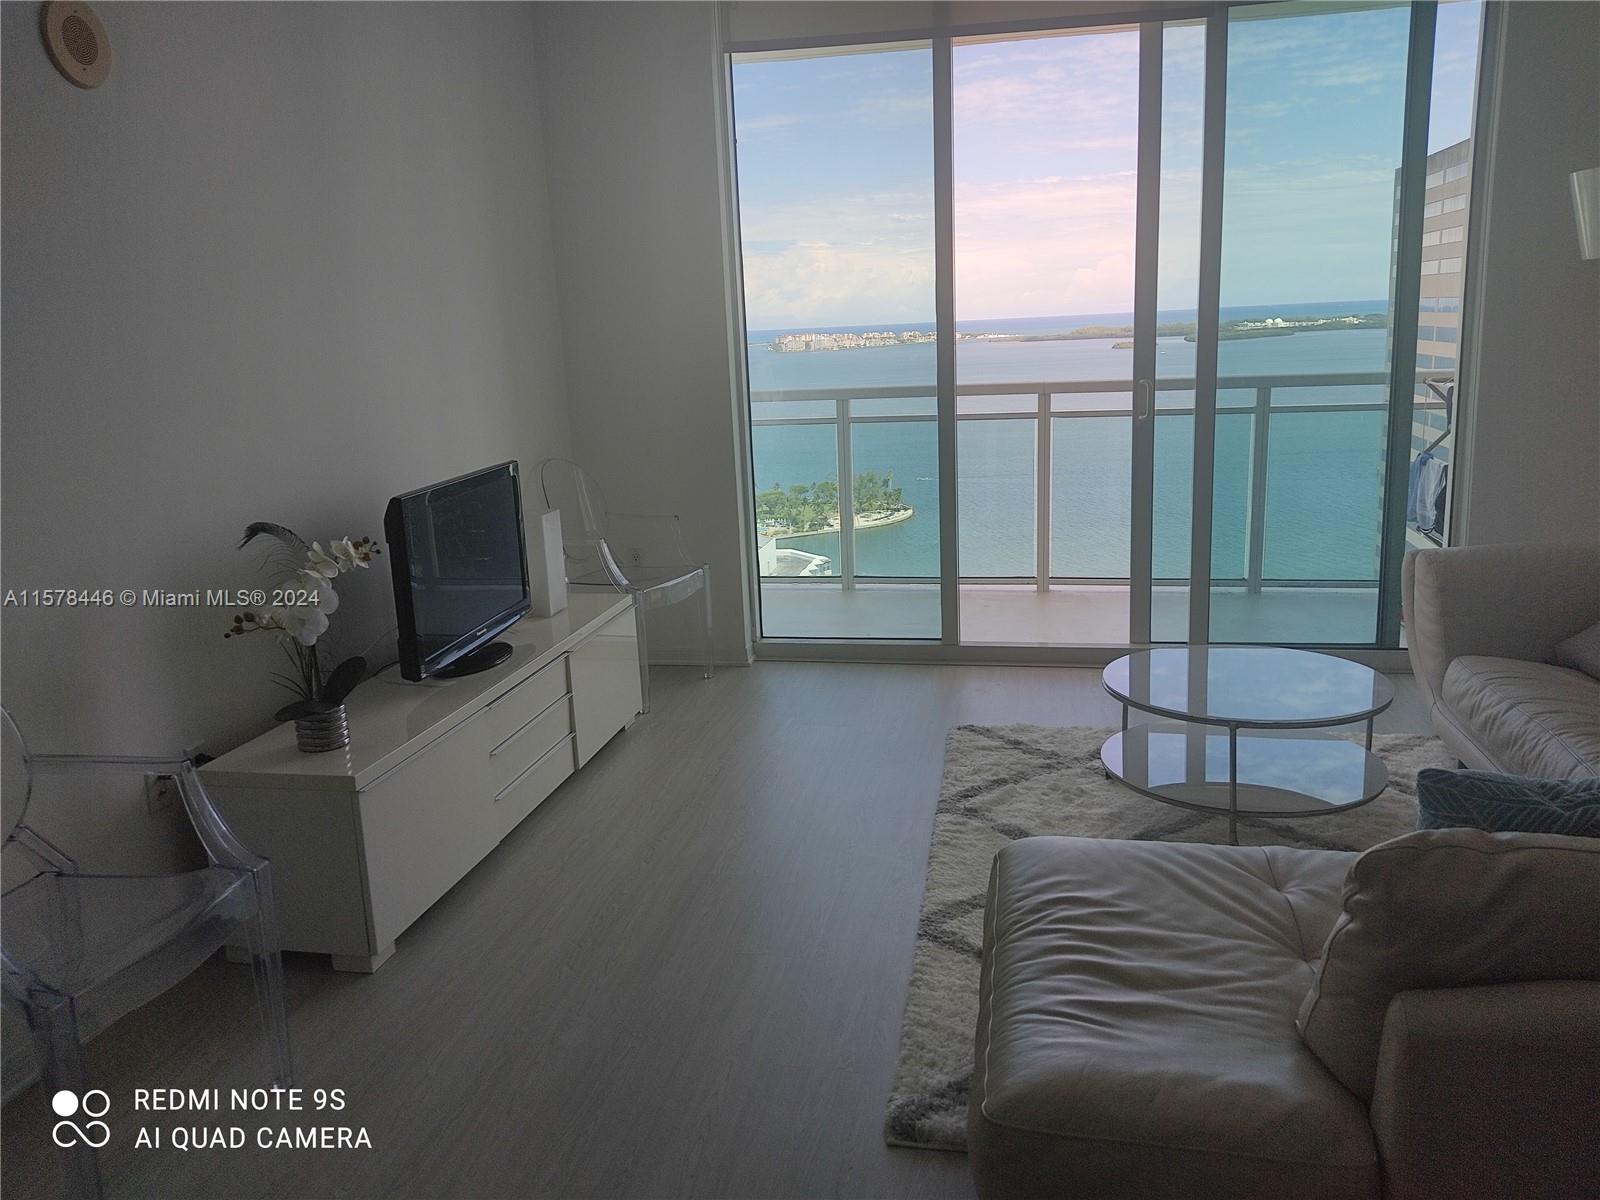 AMAZING VIEWS FROM THIS FURNISHED 1 BED/ 1 BATH APARTAMENT IN PLAZA. One of the most desirable one bedroom units in one of the most desirable buildings in Brickell. Perfect location as you have a certain calm of Brickell Bay Drive but on the other side of the building you have the busy Brickell Avenue with walking distance to docents of restaurants and shops. The Building has everything you need, with 2 large pools in a beautiful pool area with Jacuzzi and Zen garden. Gyms, Sauna, business center, etc... Unit could be rented for a lower period but at a higher rate. Unit comes with a parking space assigned in the 4th floor.